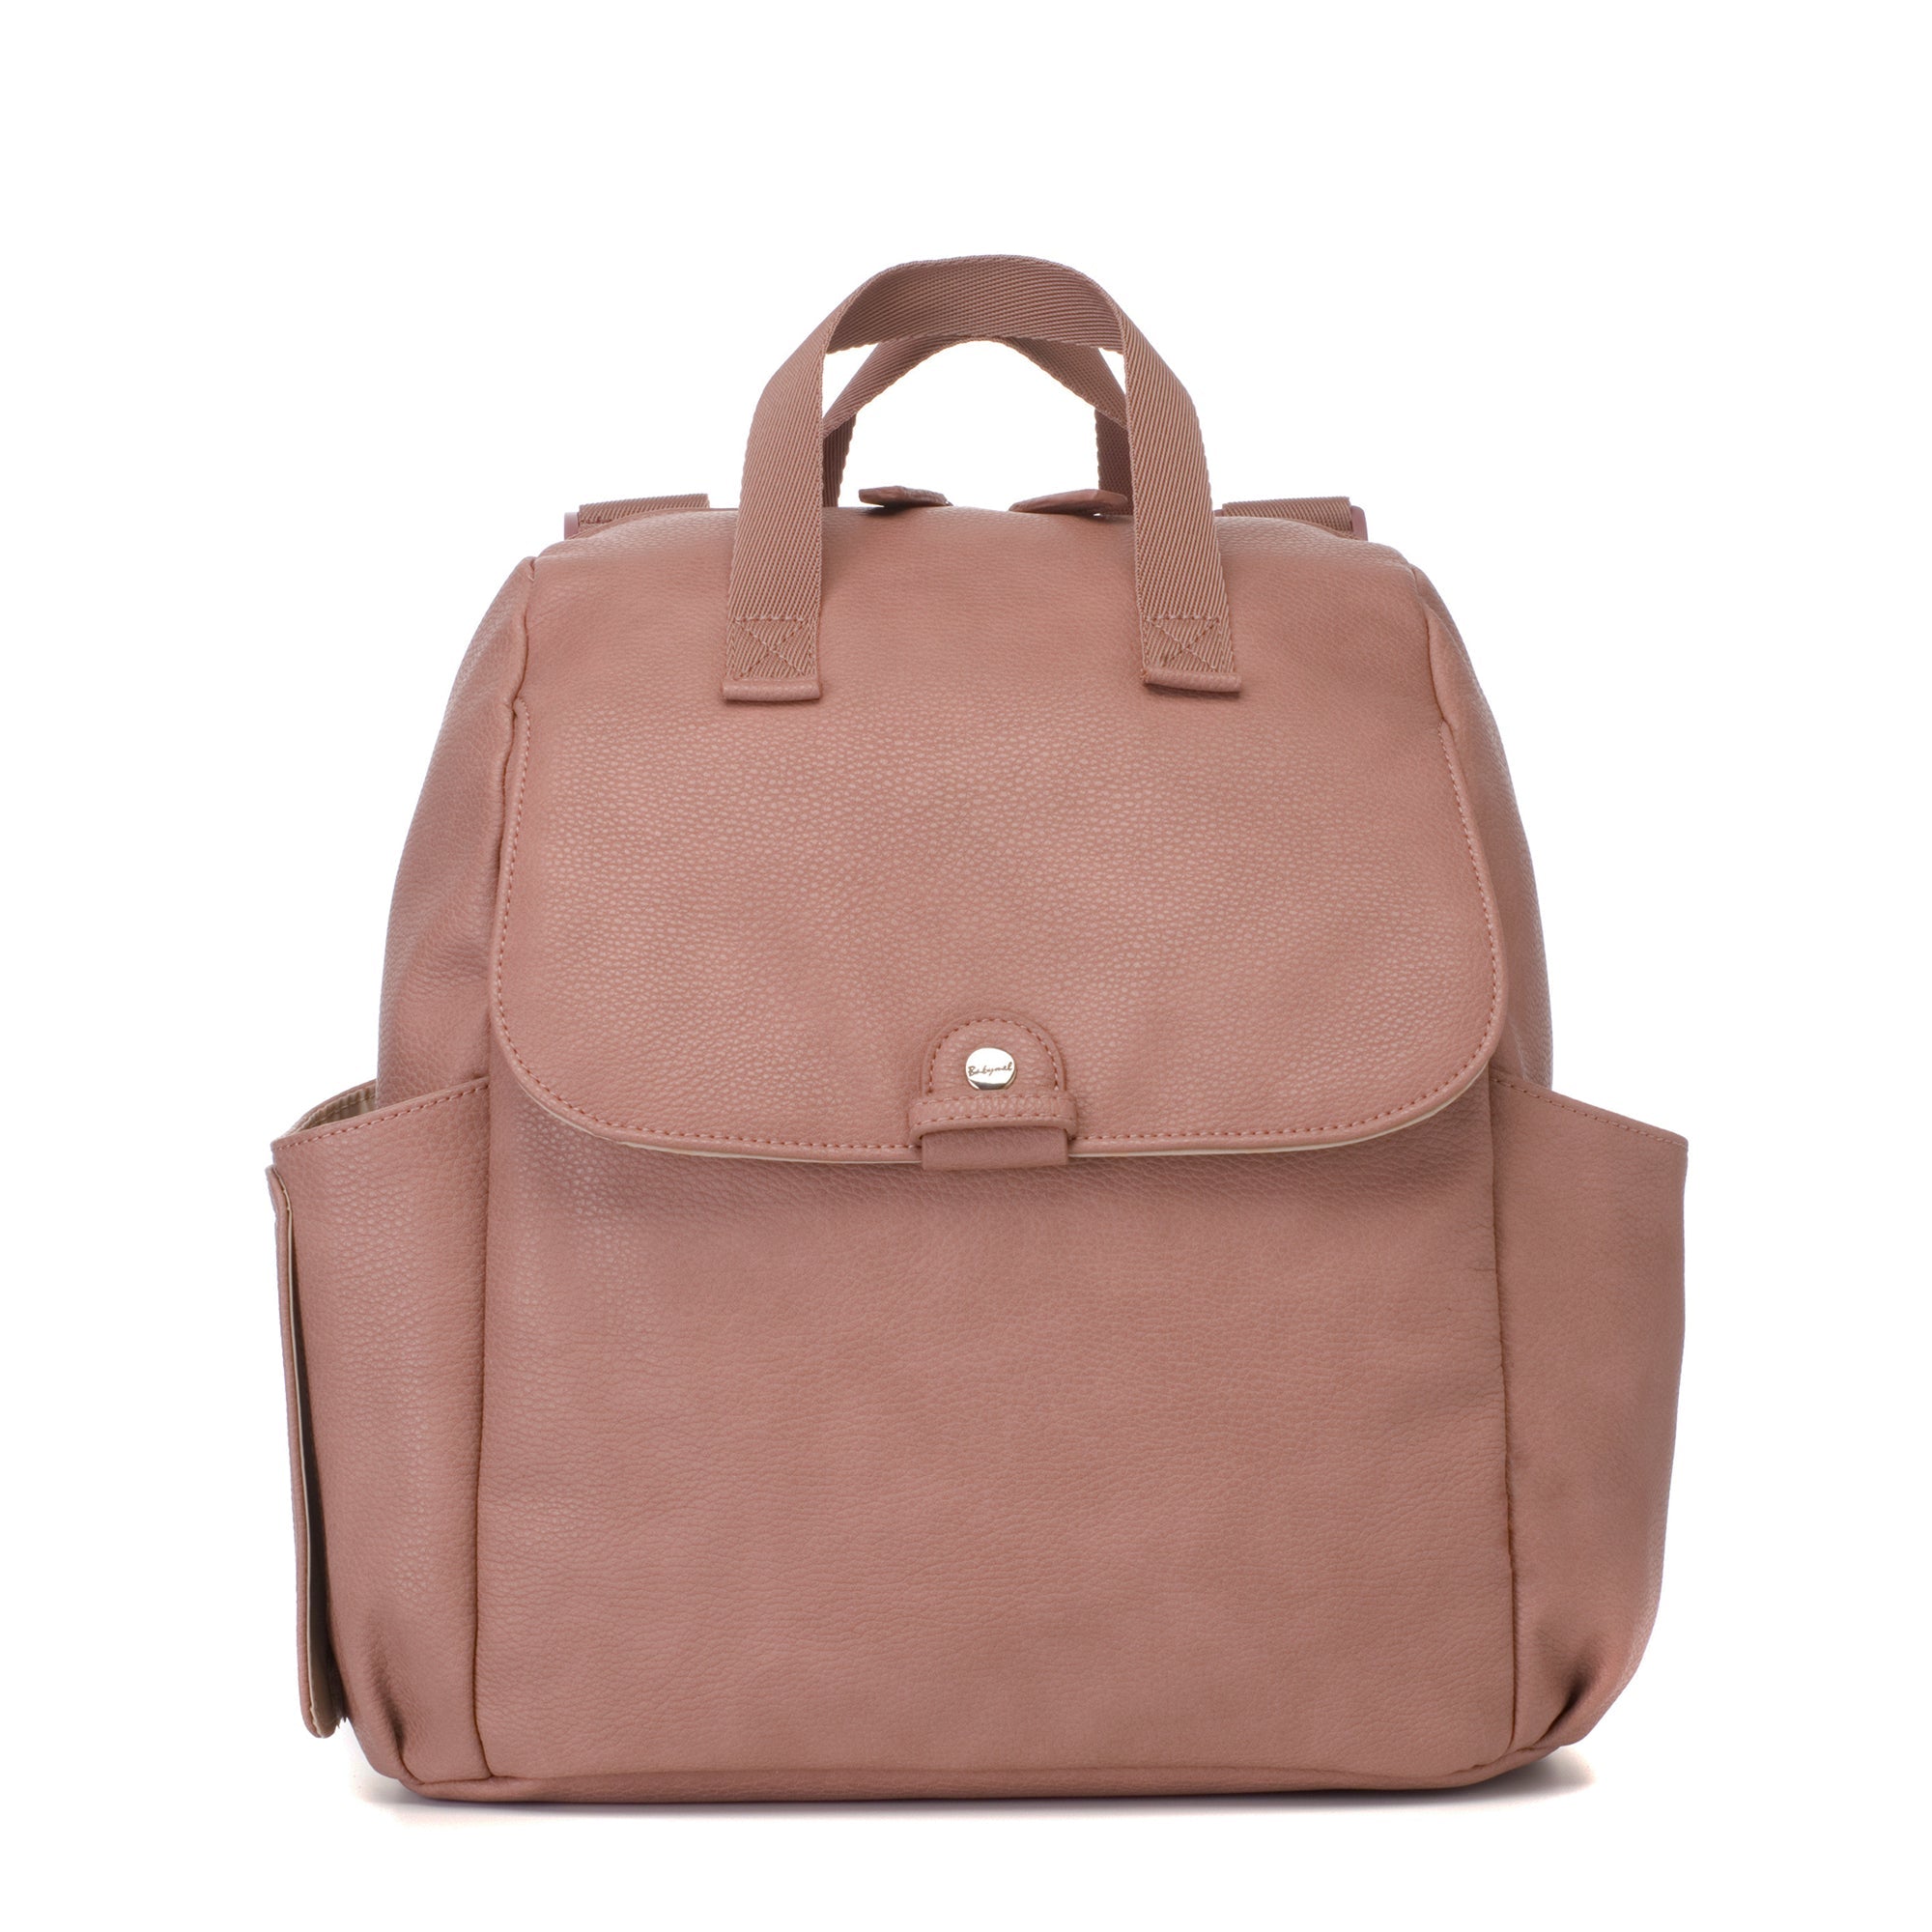 Robyn Vegan Leather Convertible Backpack Dusty Pink